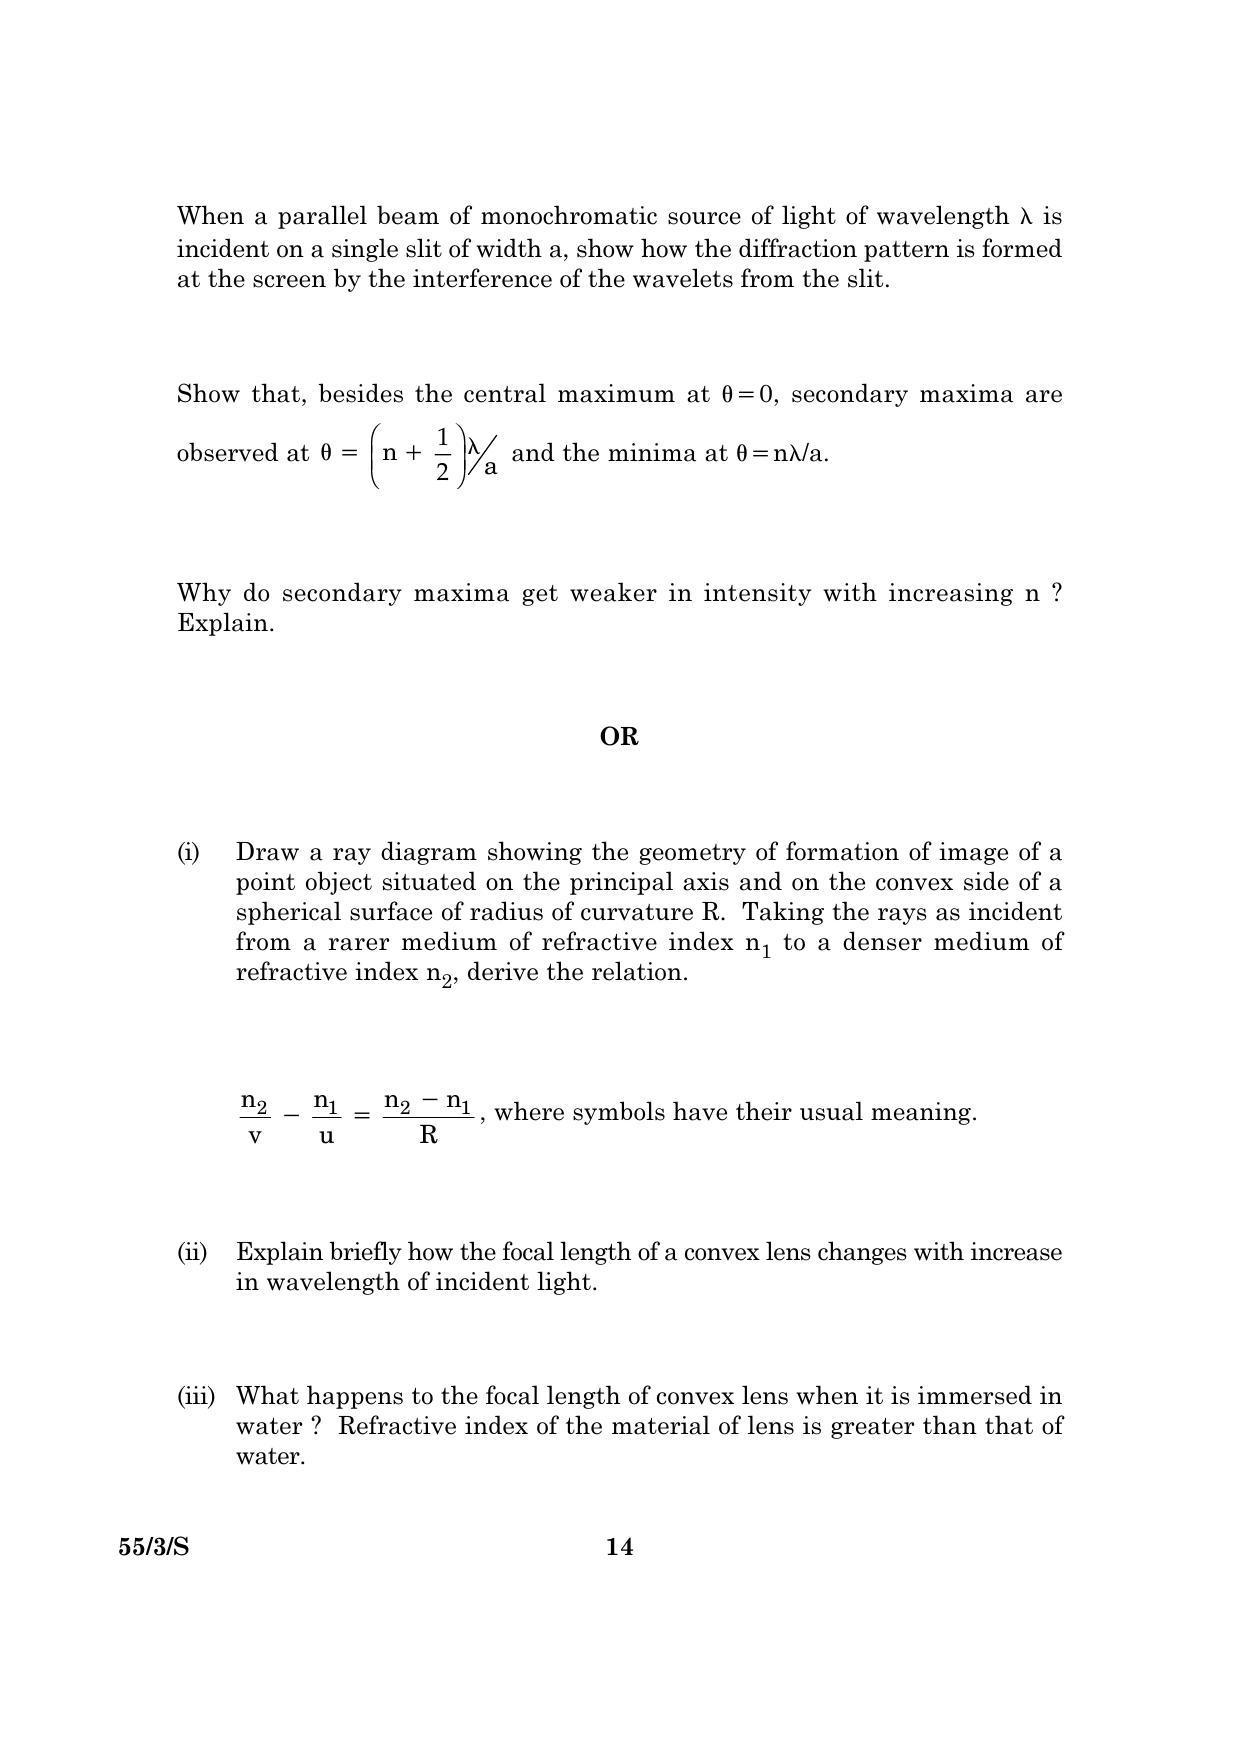 CBSE Class 12 055 Set 3 S Physics Theory 2016 Question Paper - Page 14